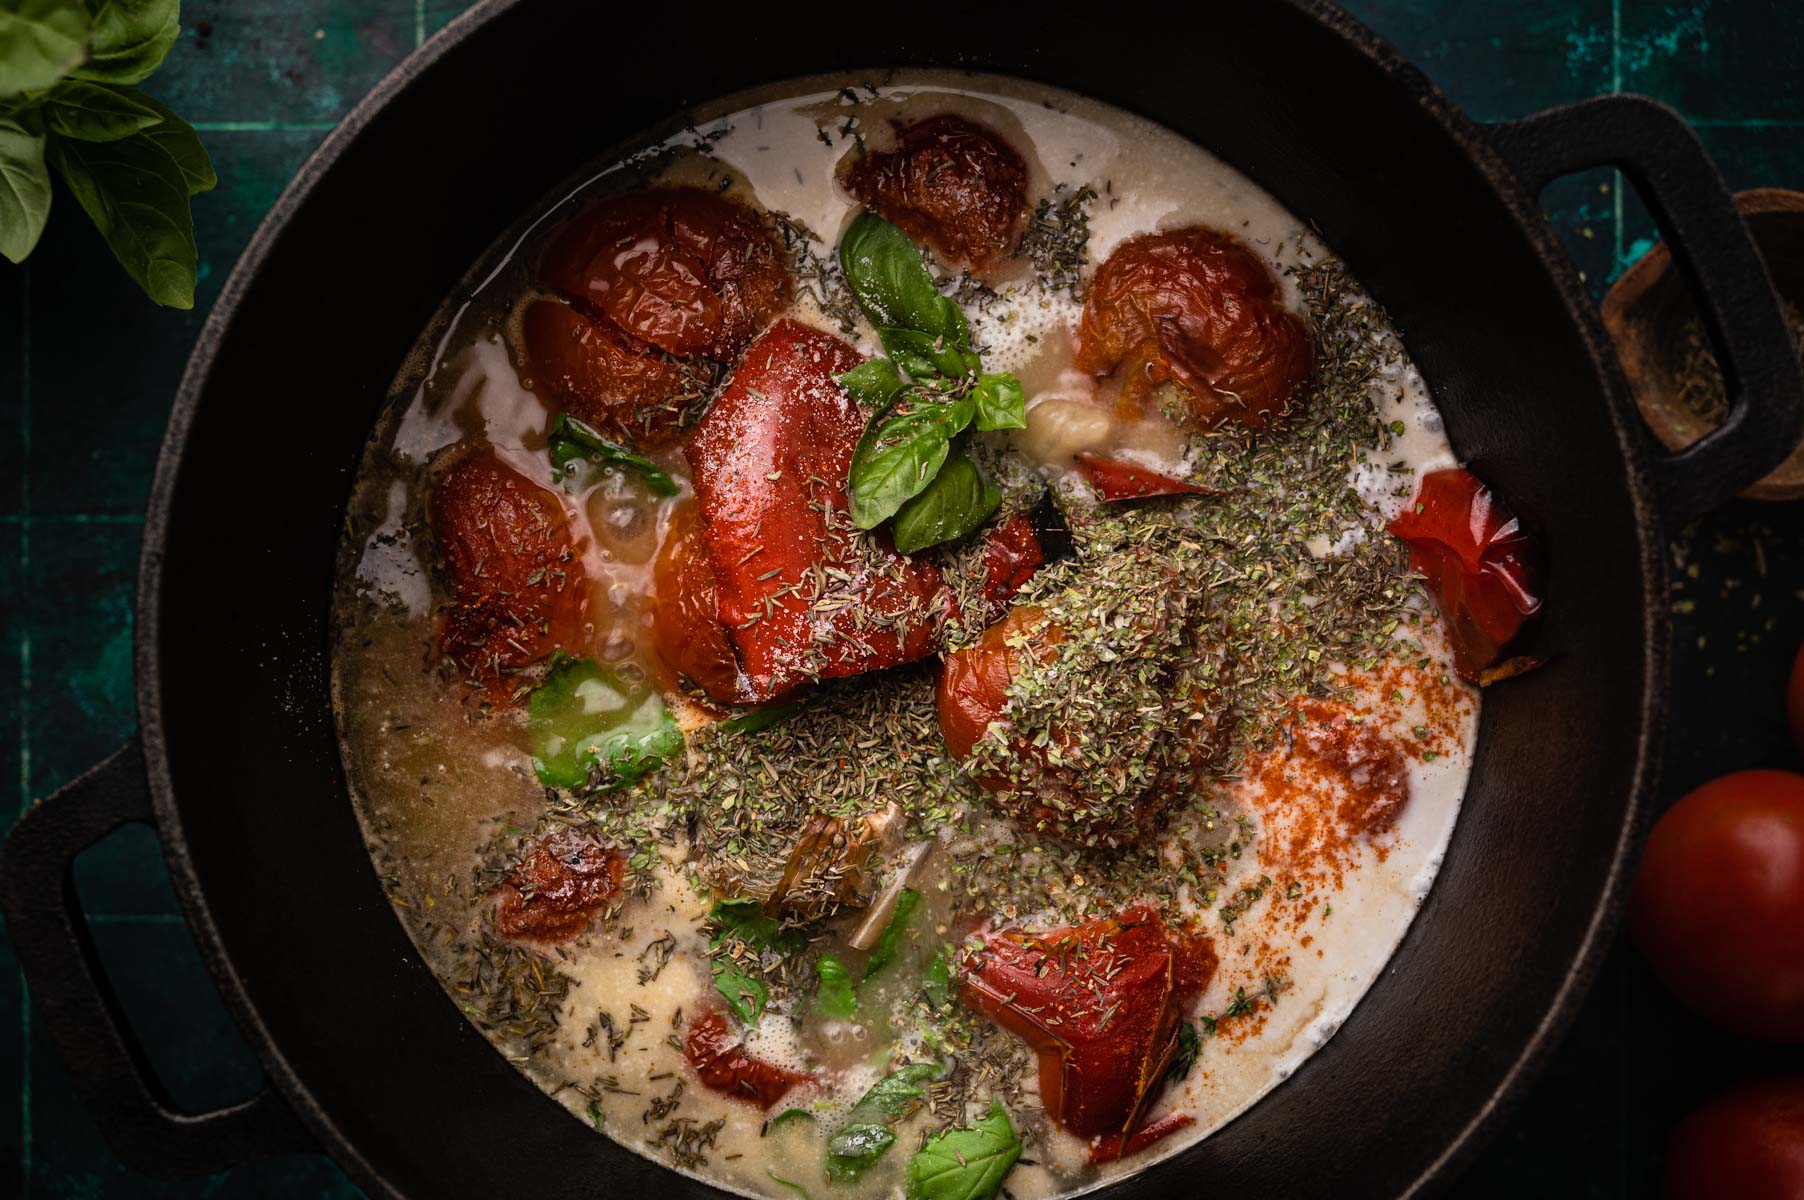 A skillet with roasted tomatoes and herbs in a creamy sauce, surrounded by fresh ingredients on a dark surface.